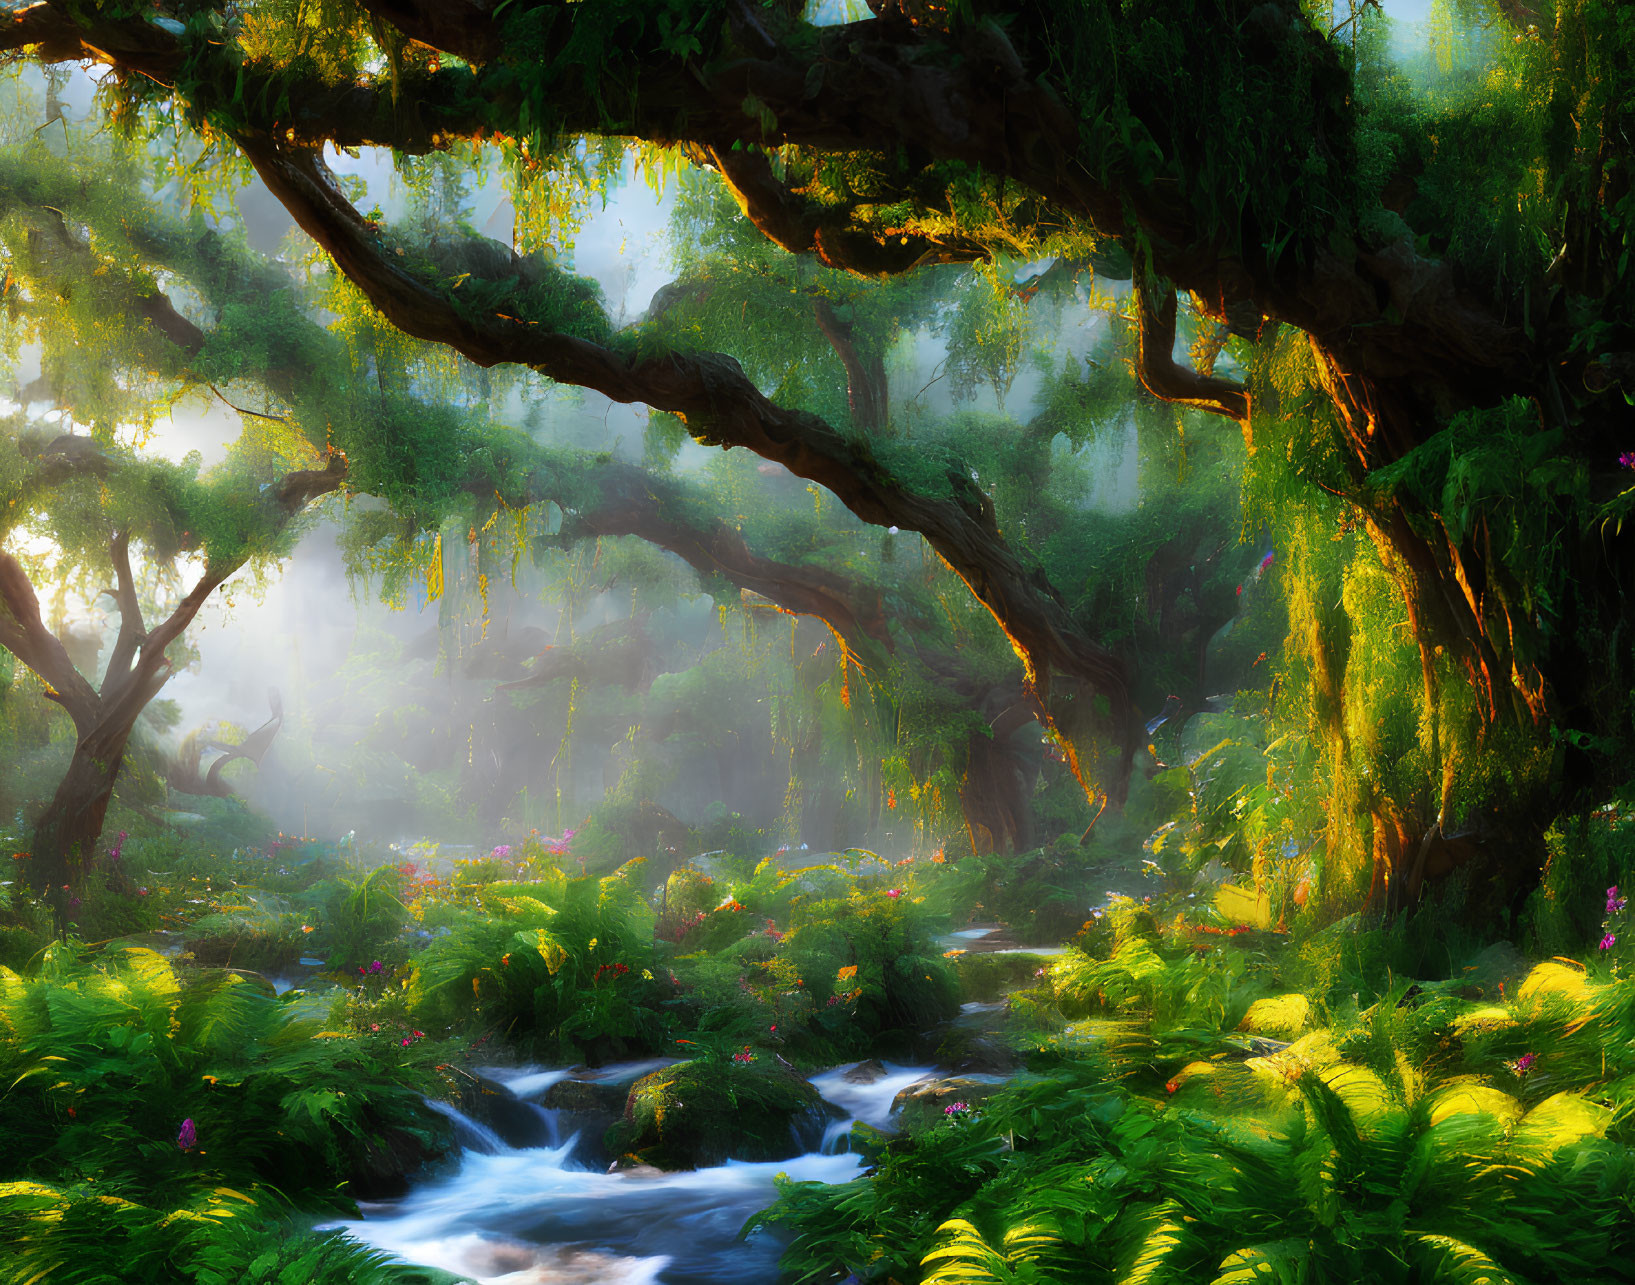 Lush greenery and vibrant flora in enchanted forest scene